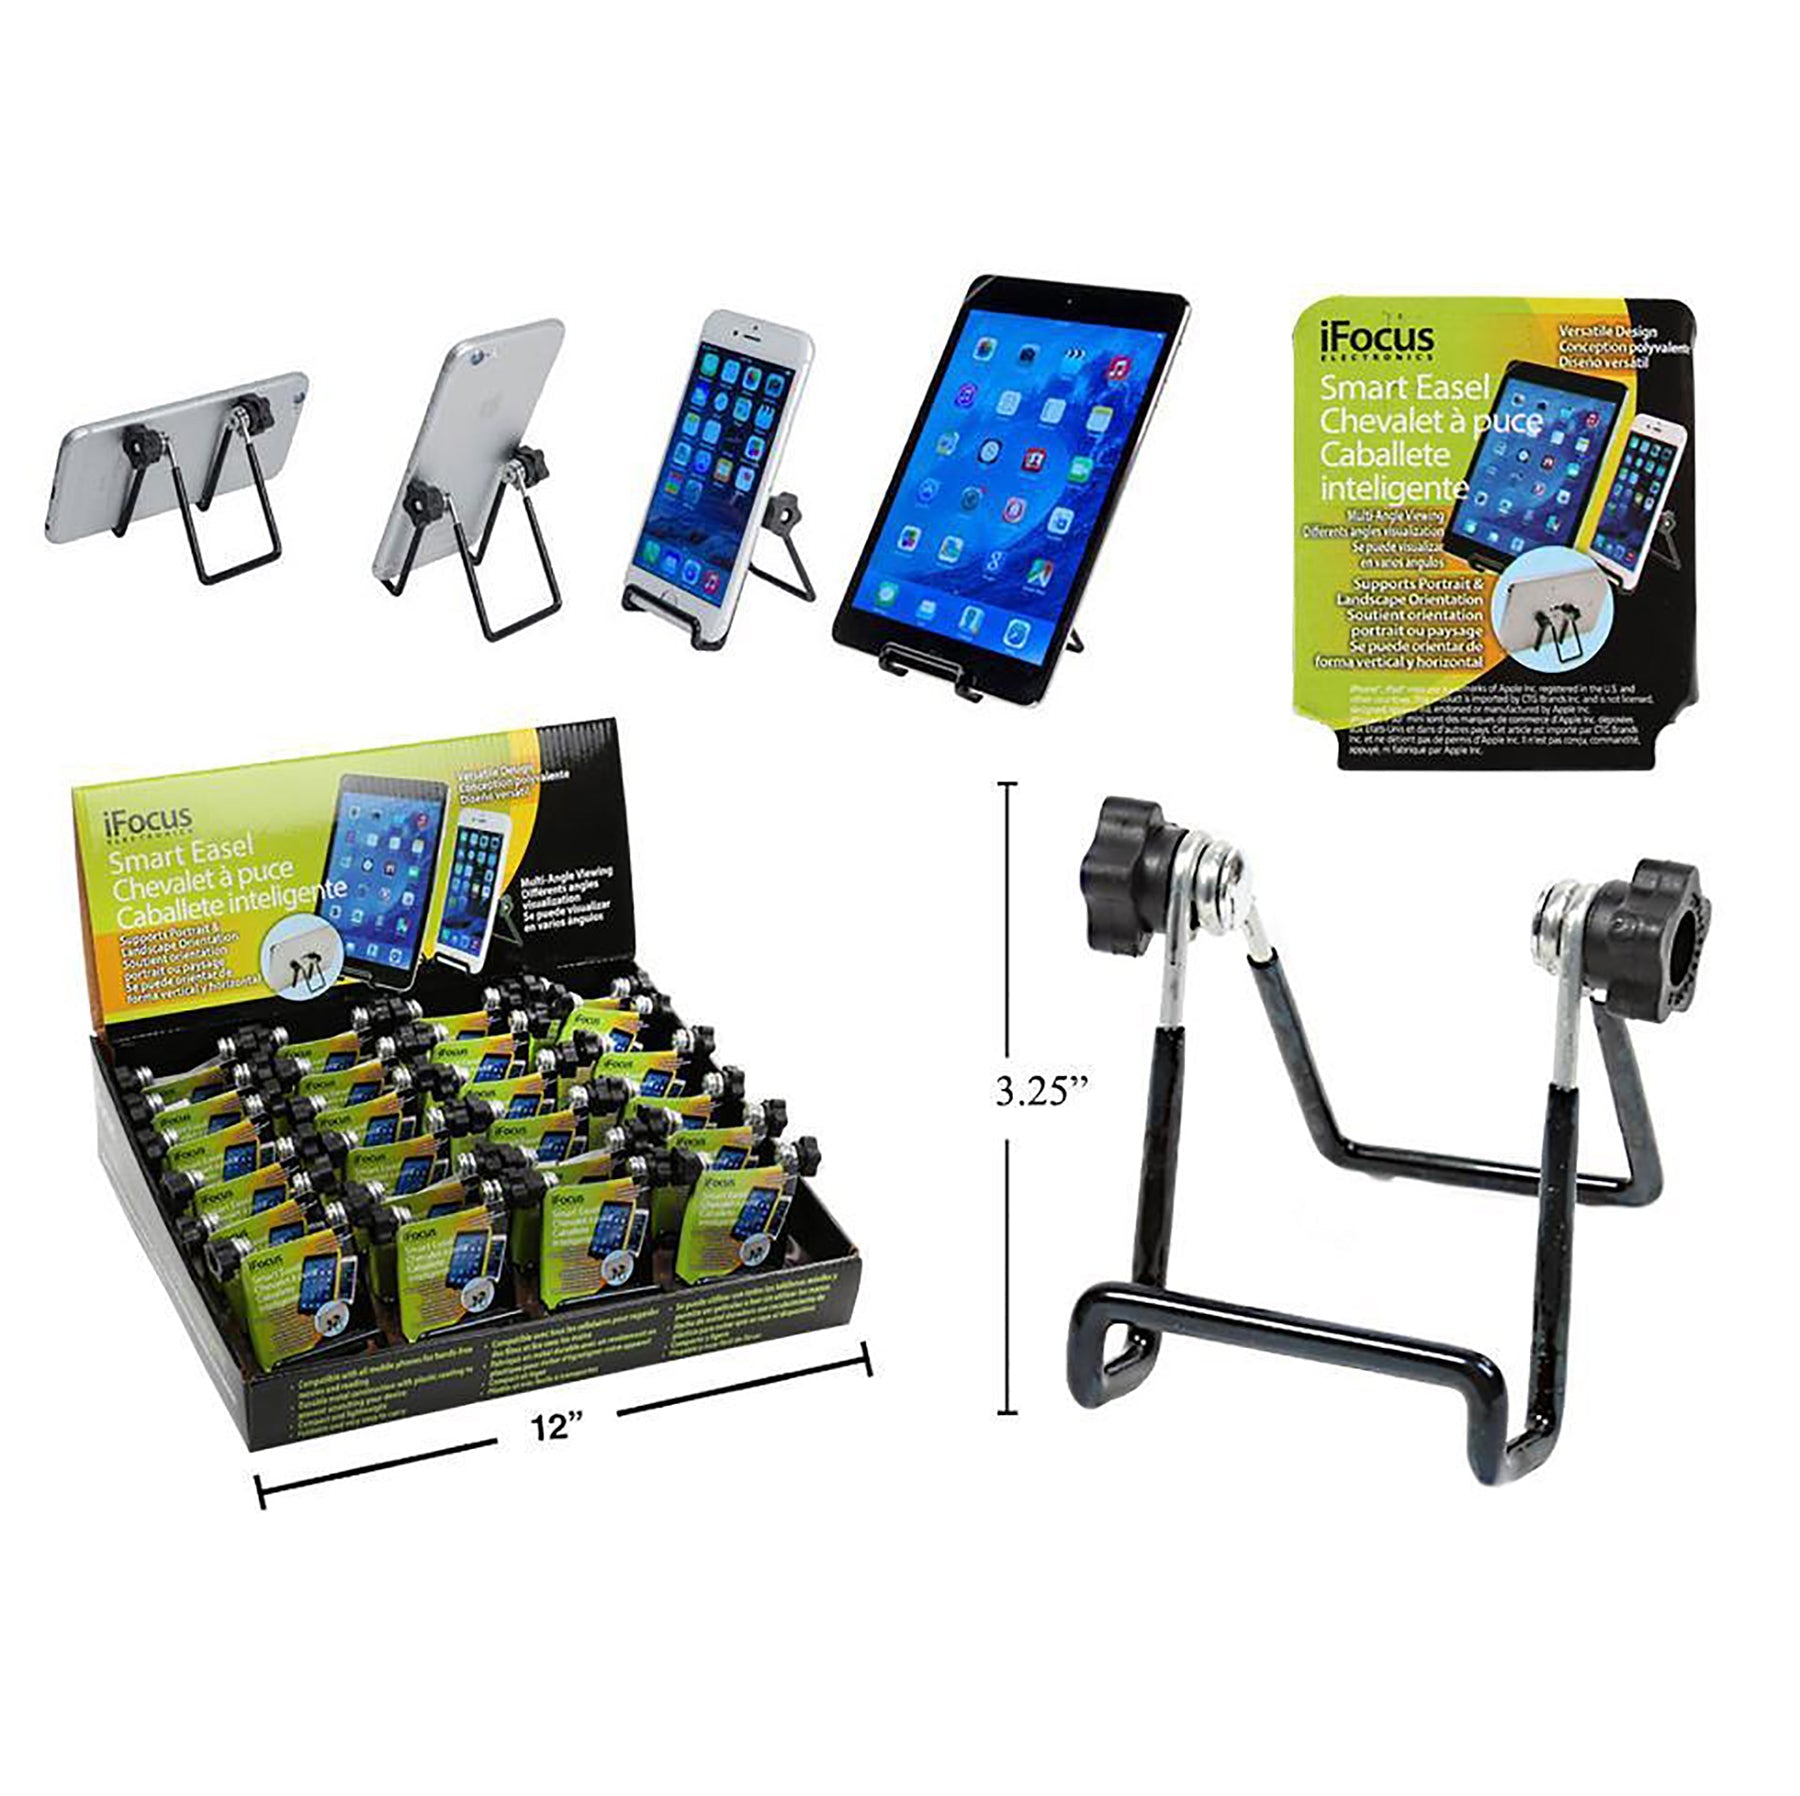 iFocus Smart Easel for Mobile Phones and Mini Tablets 3.25in